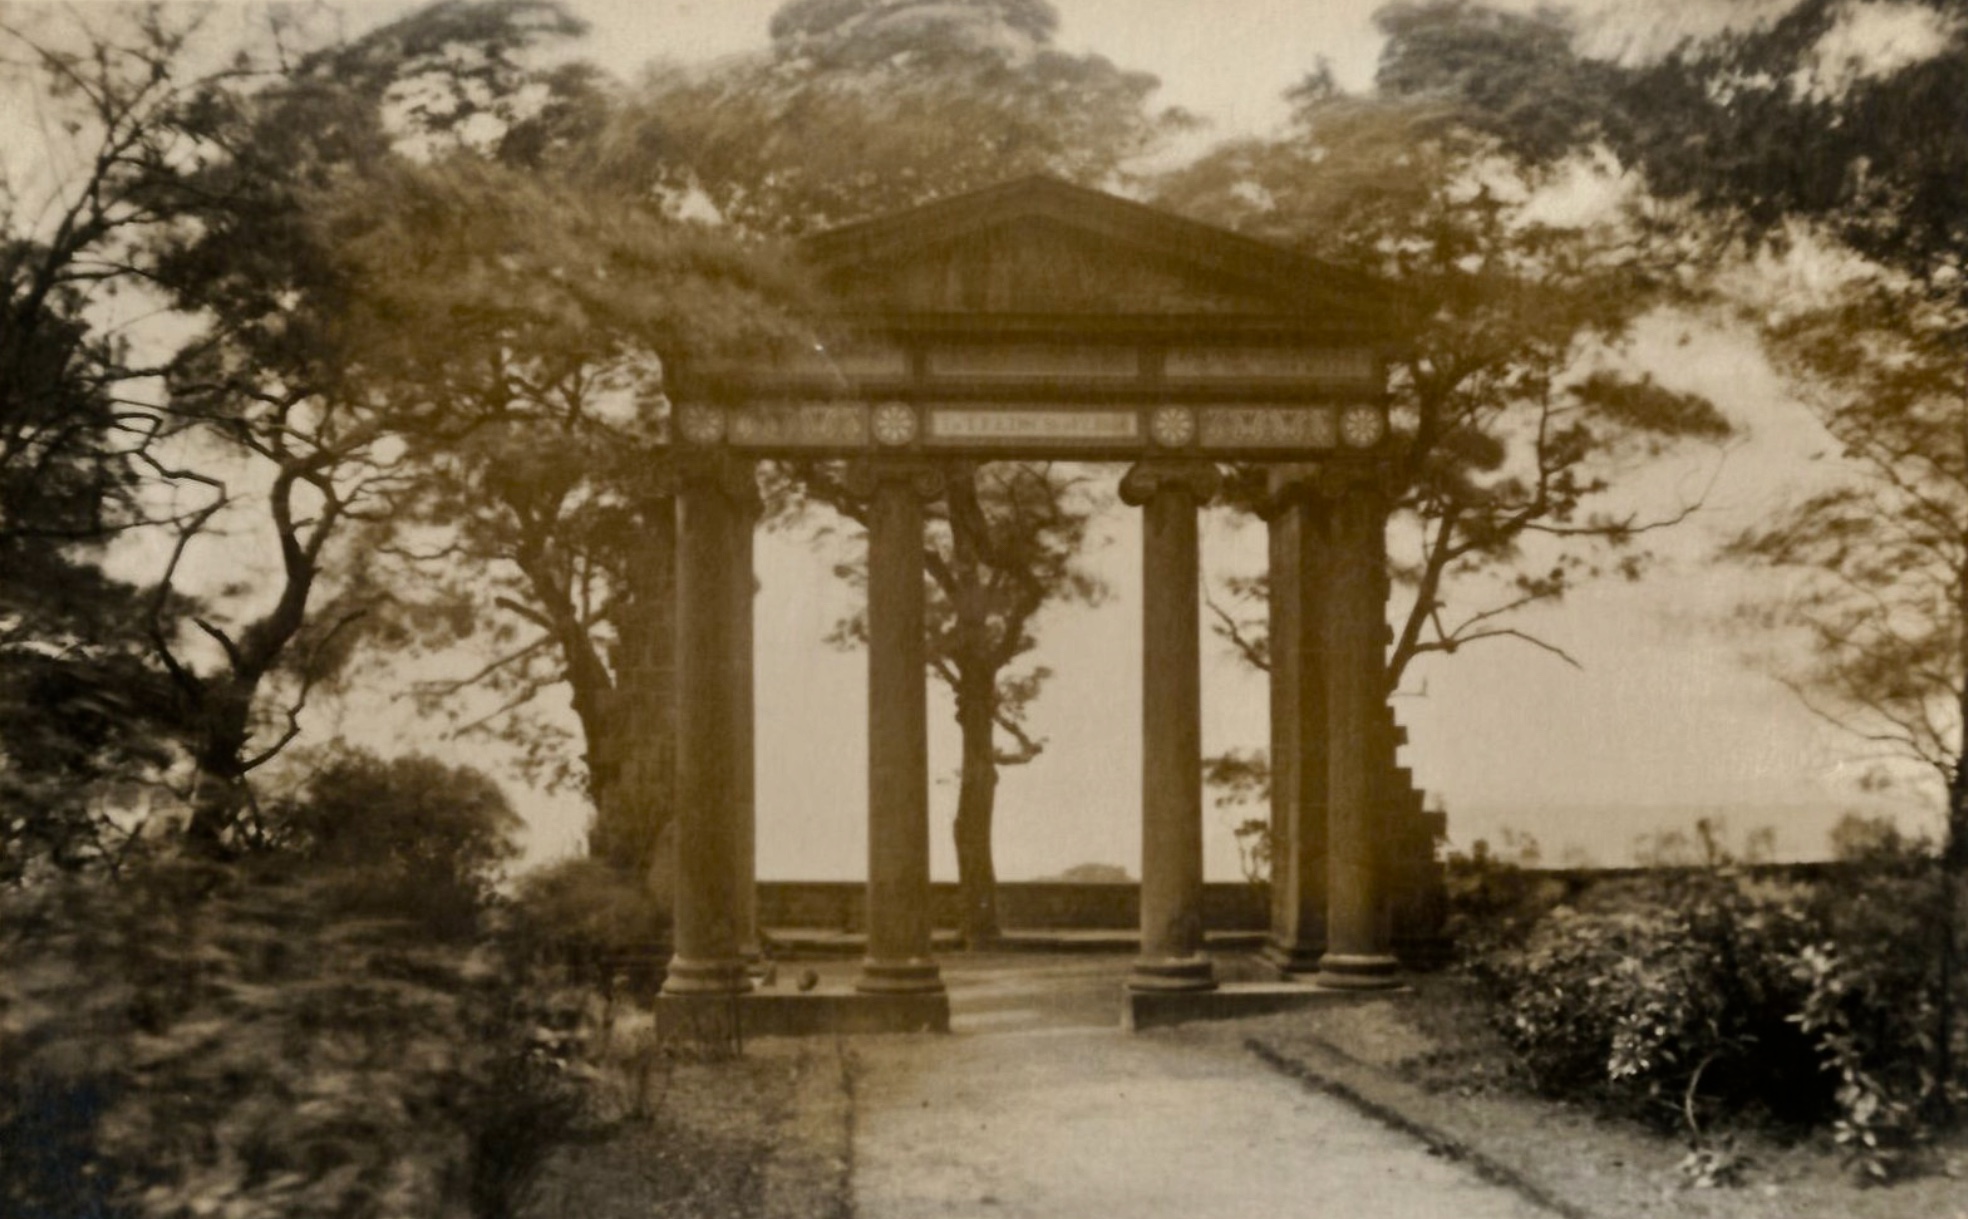 Queenswood Monument, 1858, for Queen Victoria’s visit to Leeds.  Photo 1909